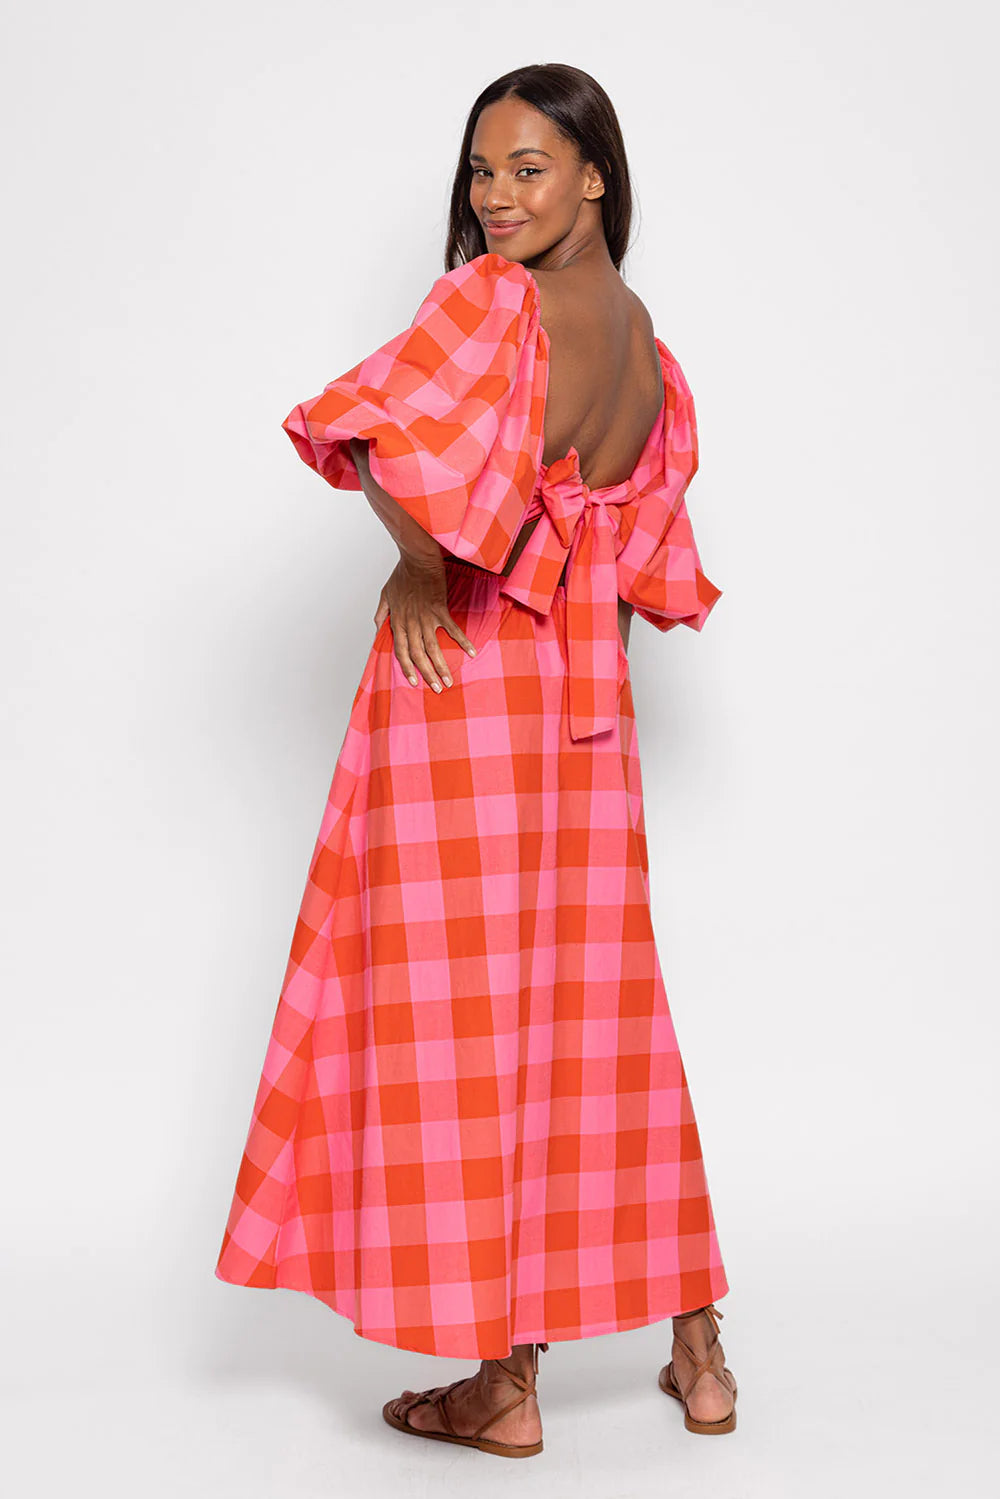 Large gingham red and pink dress with huge puff sleeves sweetheart neckline and A line midi/maxi length skirt